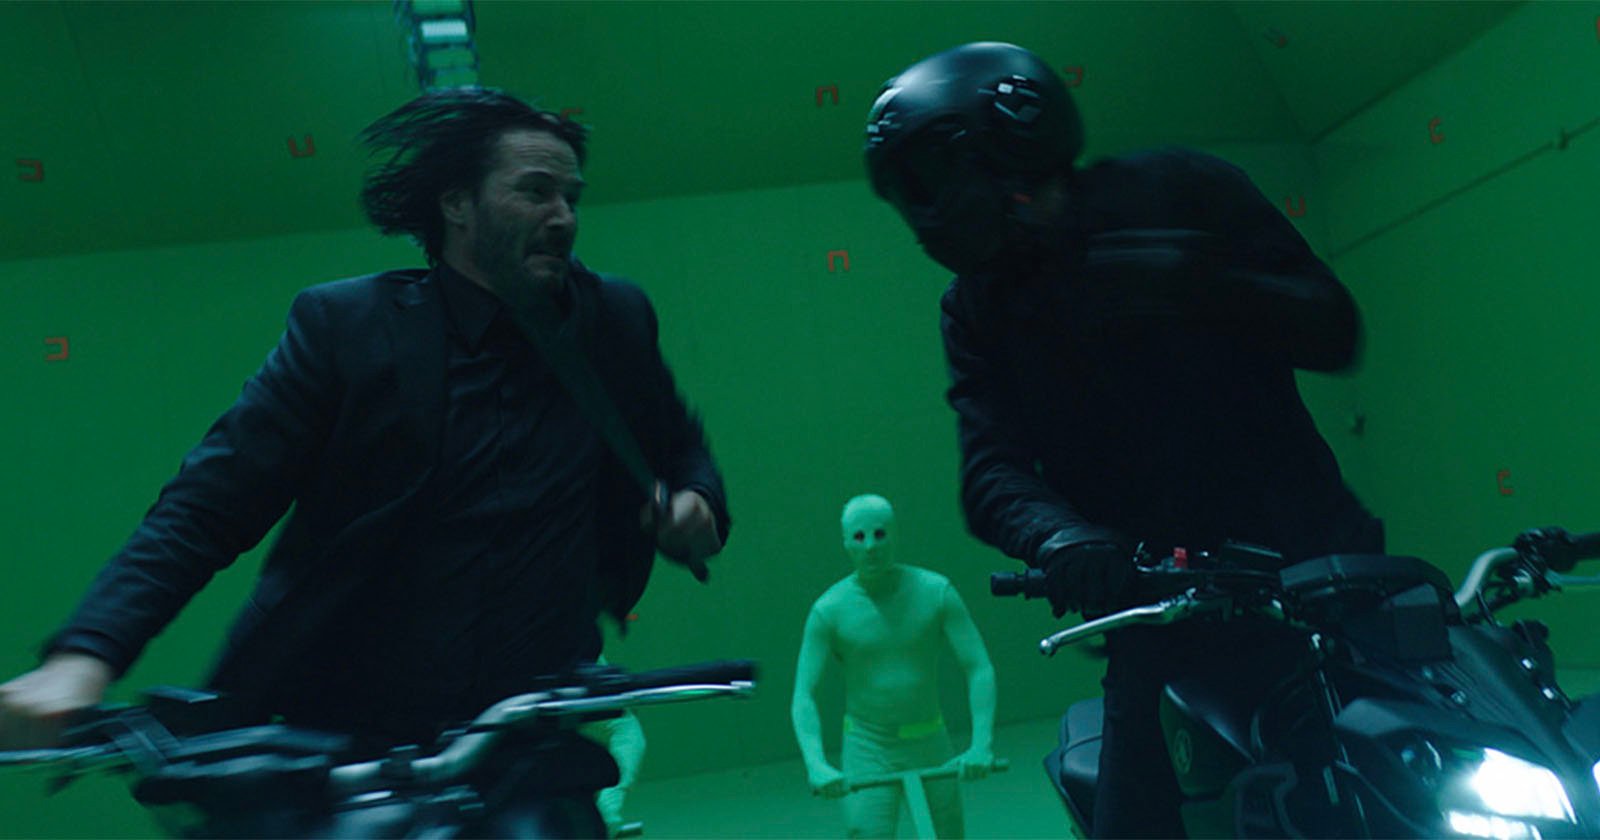 Incredible BTS Footage of John Wick Shows Expert Camerawork and Choreography